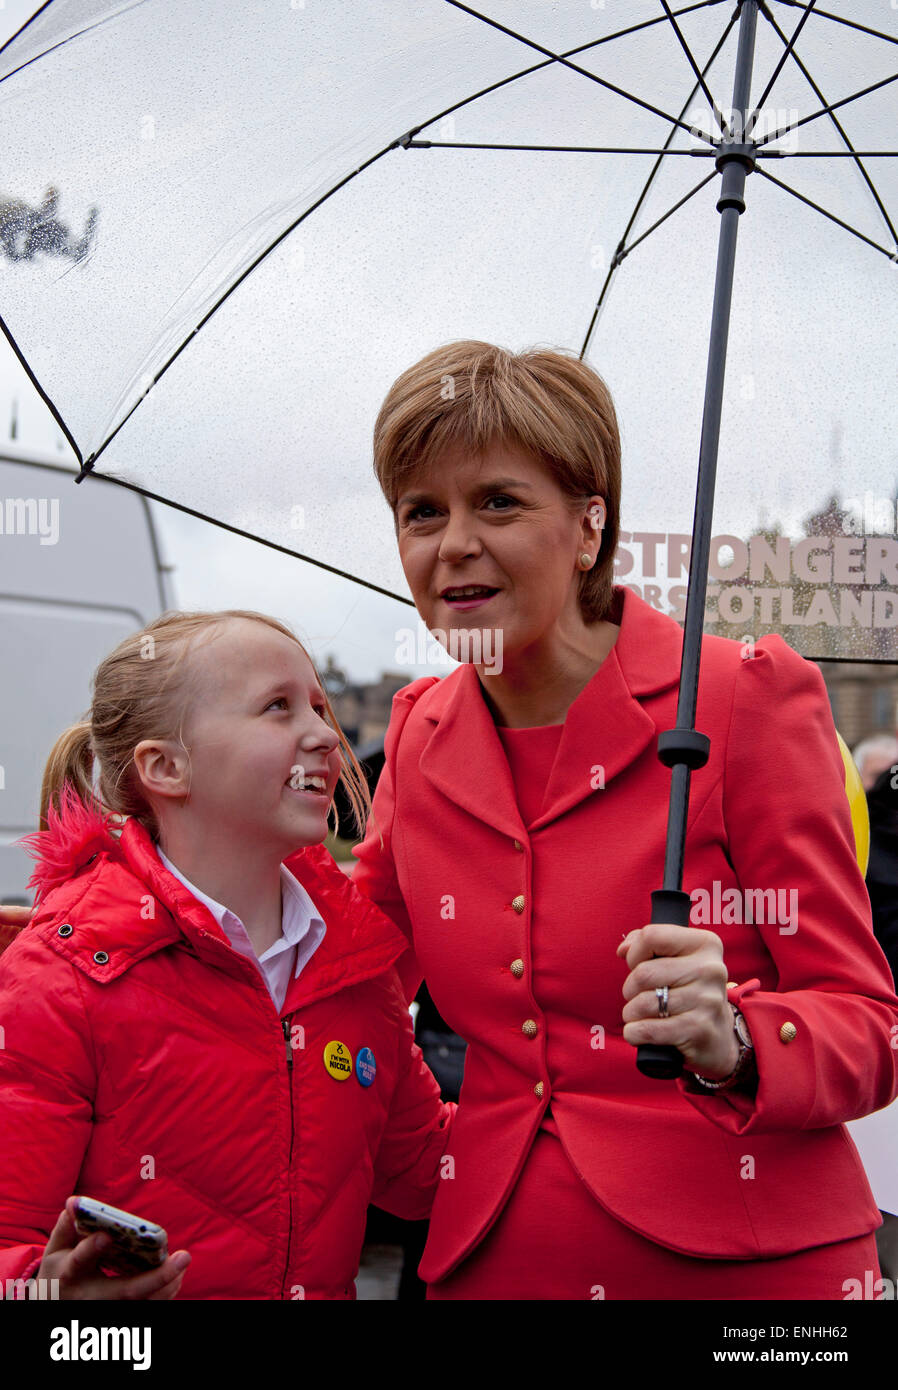 TThe Mound, Edinburgh, Scotland, UK, 6th May 2015. Nicola Sturgeon Scottish National Party leader braves the dreich Scottish weather with supporters to hold a street stall event at  The Mound Edinburgh to talk to voters about the SNP's alternative to austerity. Stock Photo